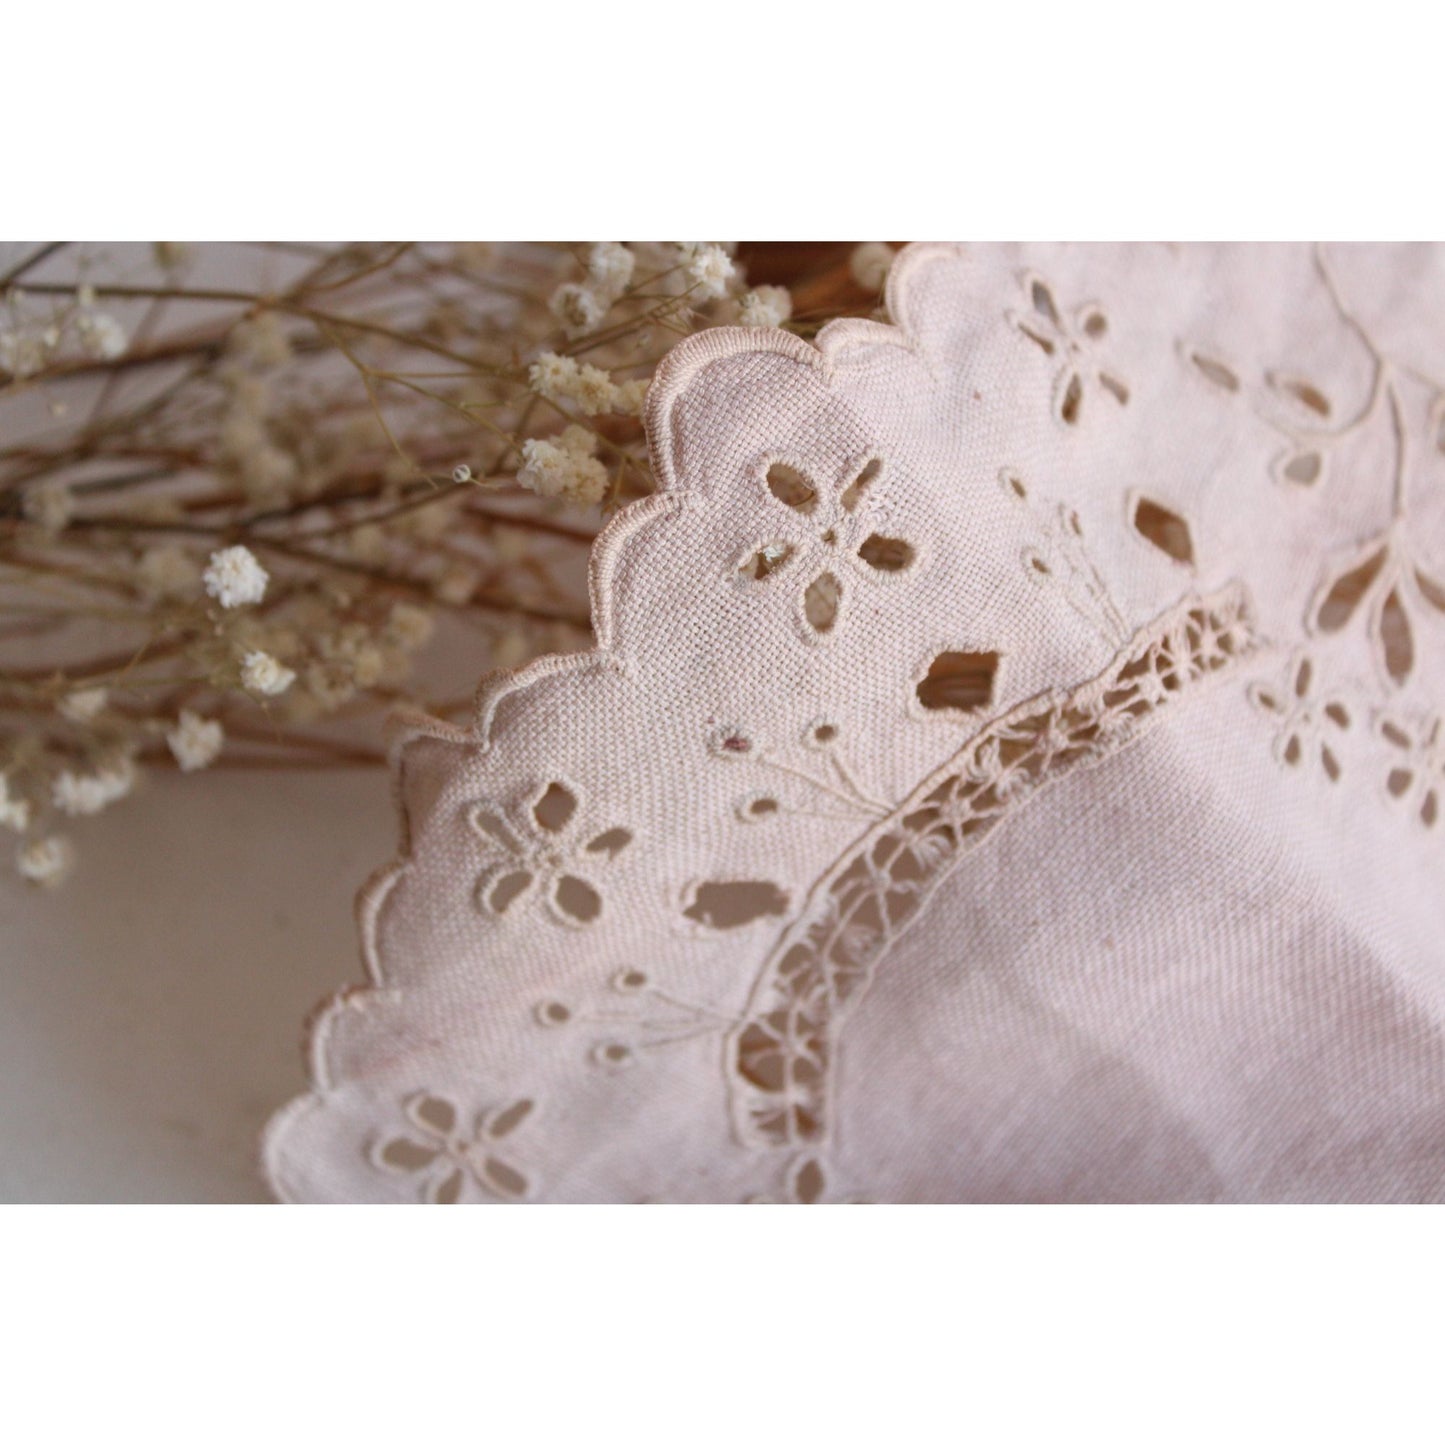 1950s Naturally Hand Dyed Vintage Doily in Dusty Pink